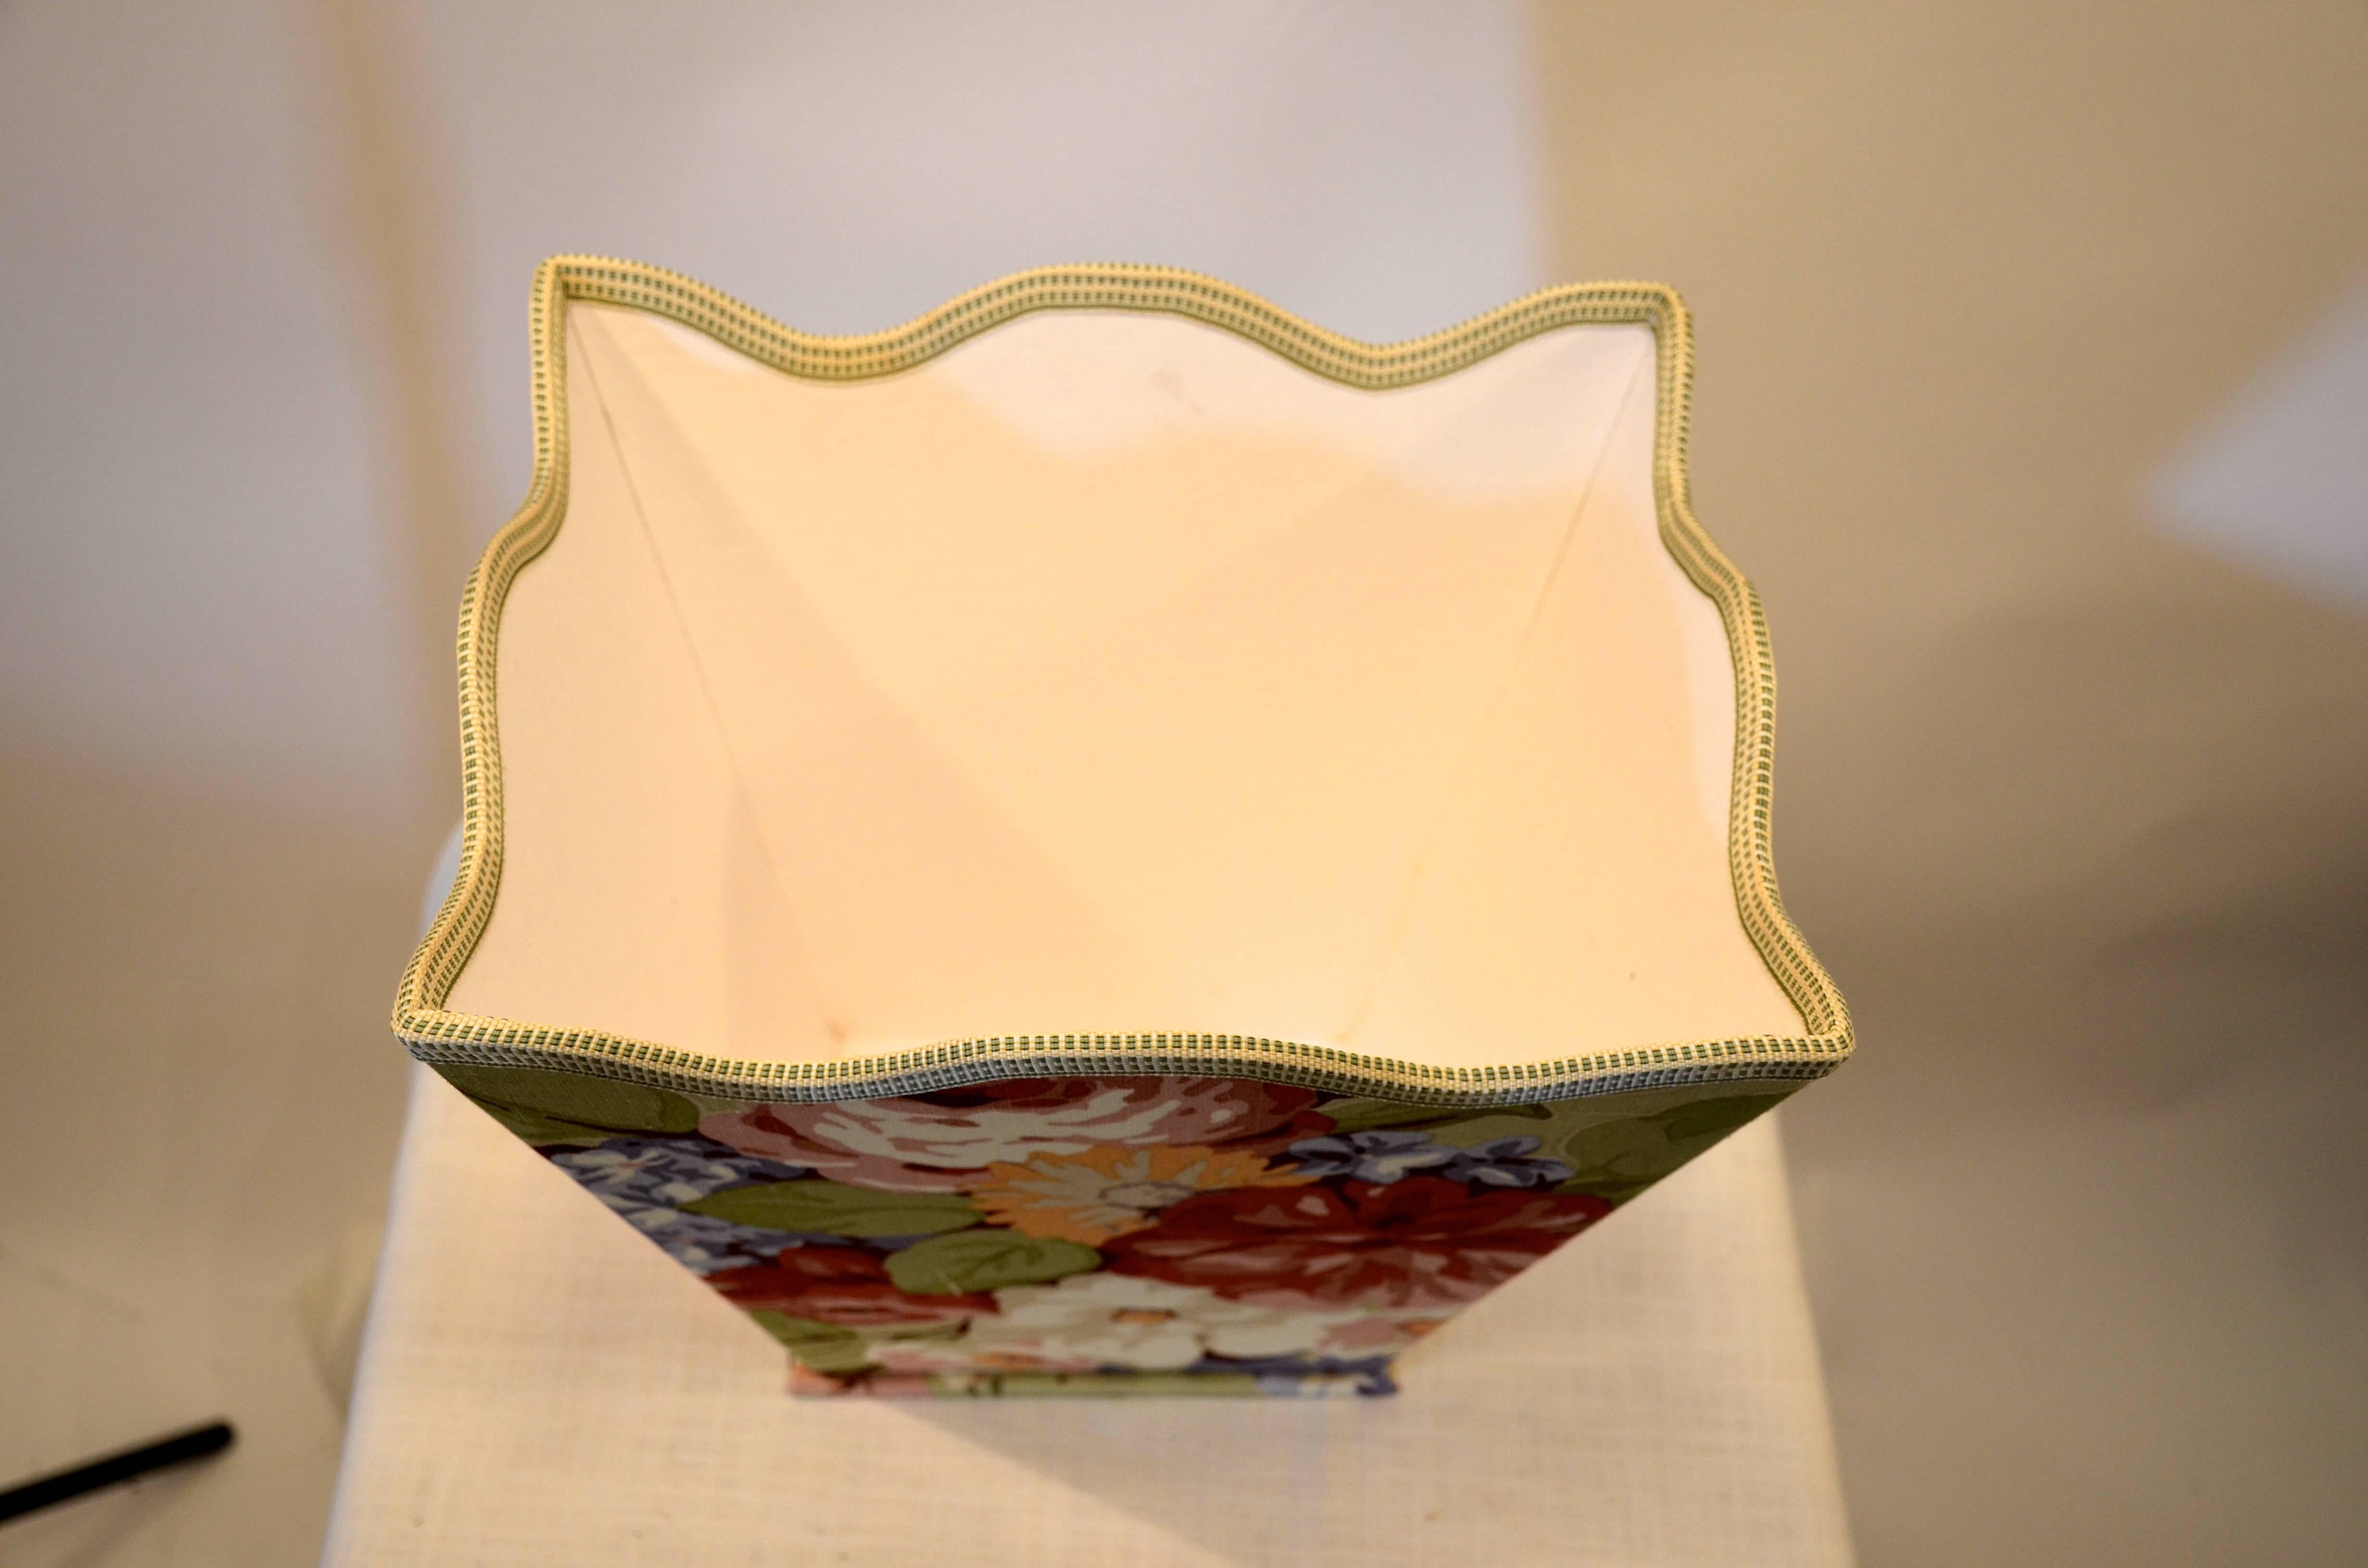 Handmade floral wastebasket with scalloped edge.